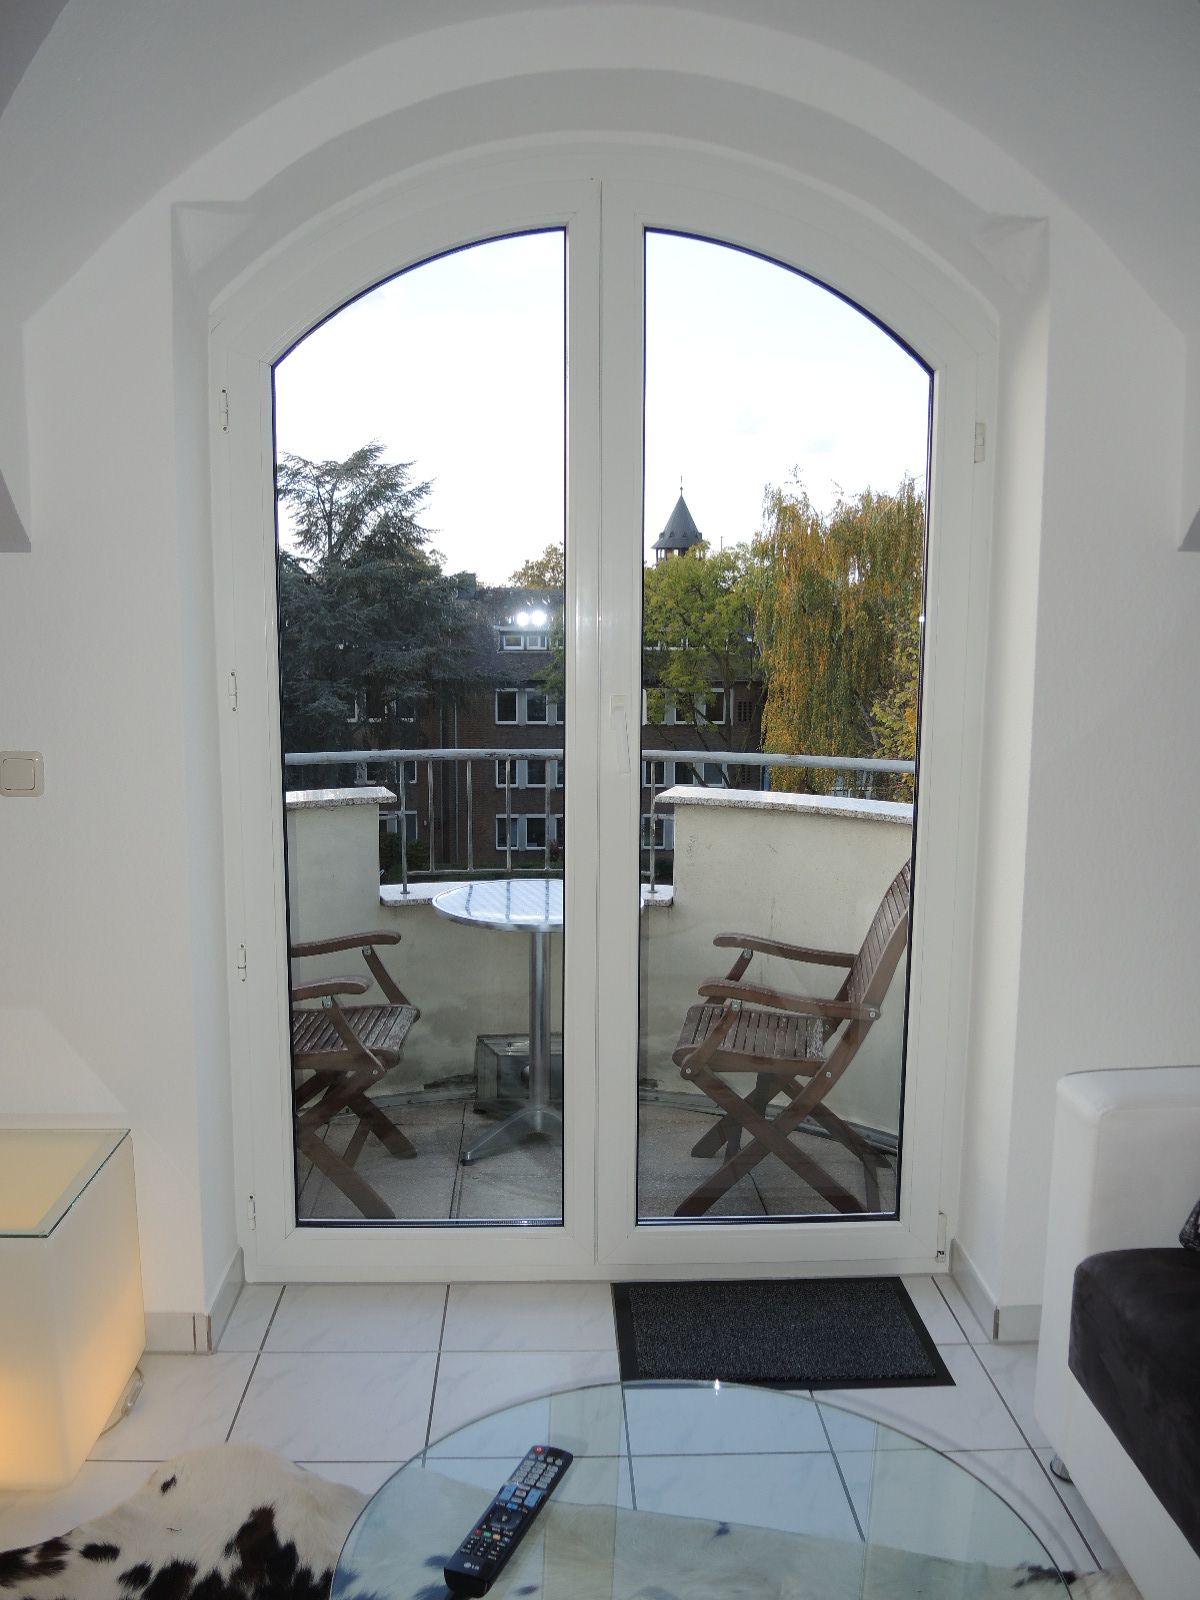 2 Zi-Maisonette-Wgh air conditioning balcony Severinsviertel compl furnished bright quiet near CBS all inclusive